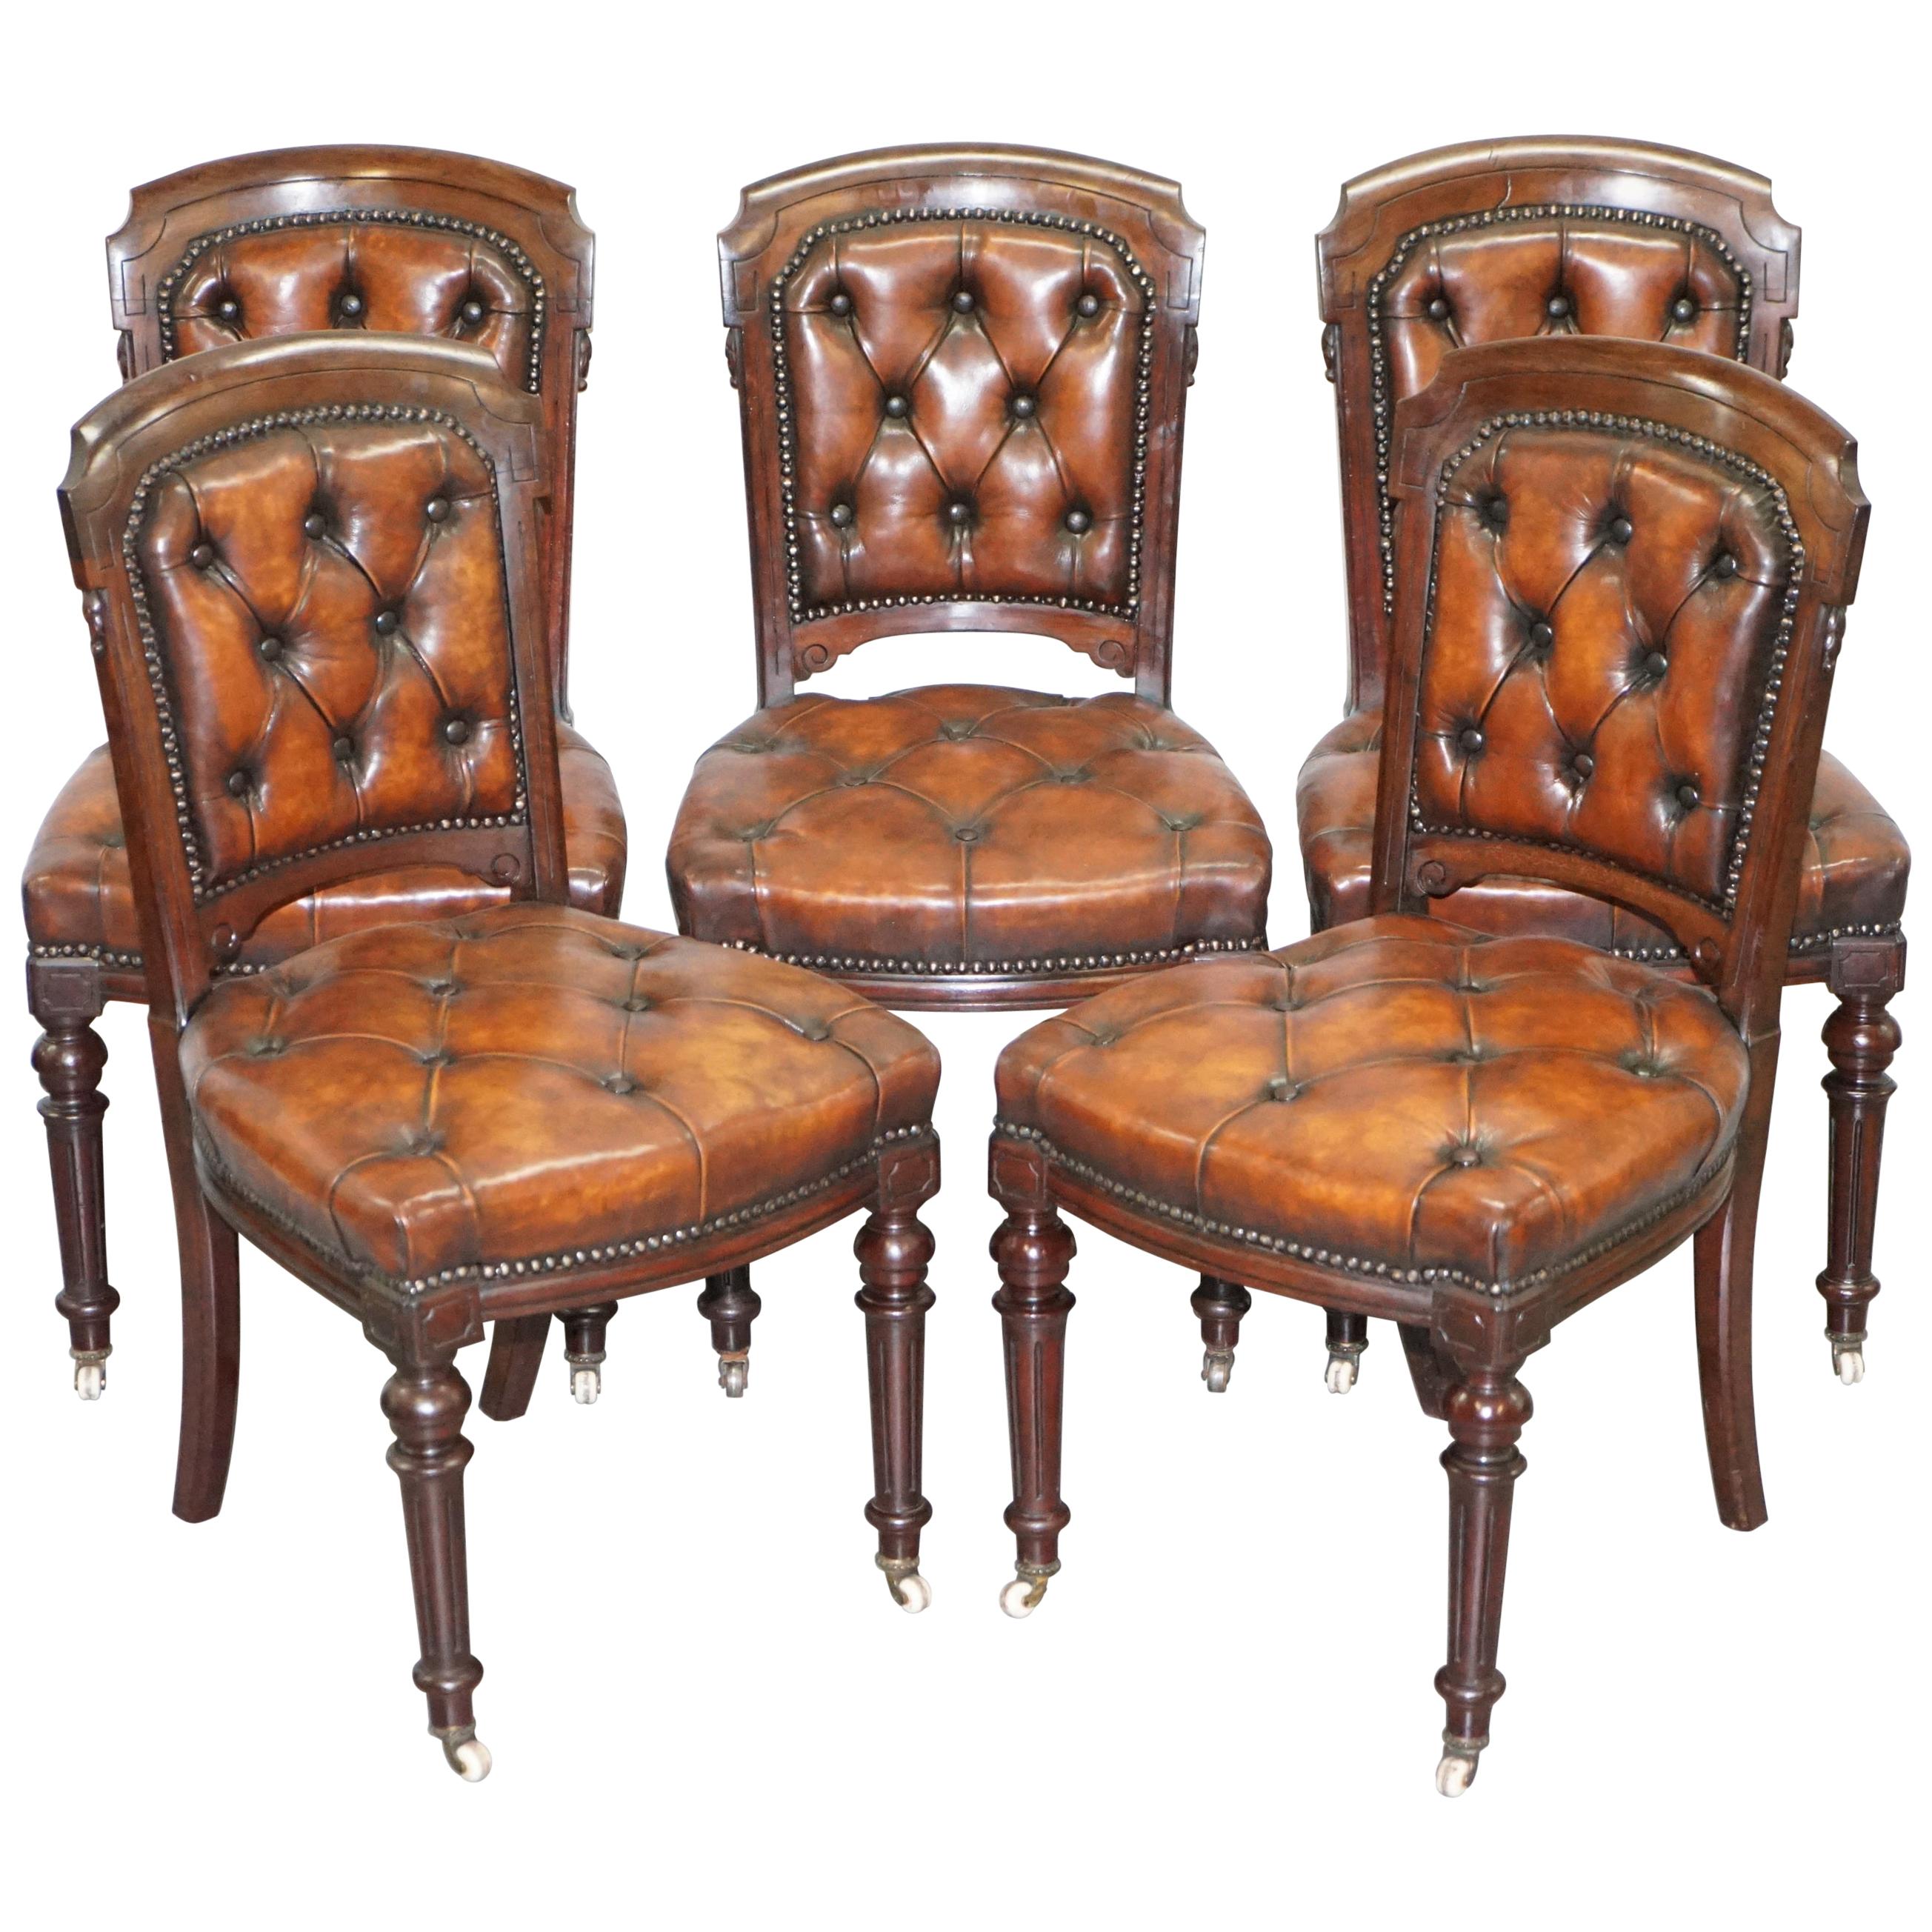 Fully Restored Suite of Five Chesterfield Brown Leather & Hardwood Dining Chairs